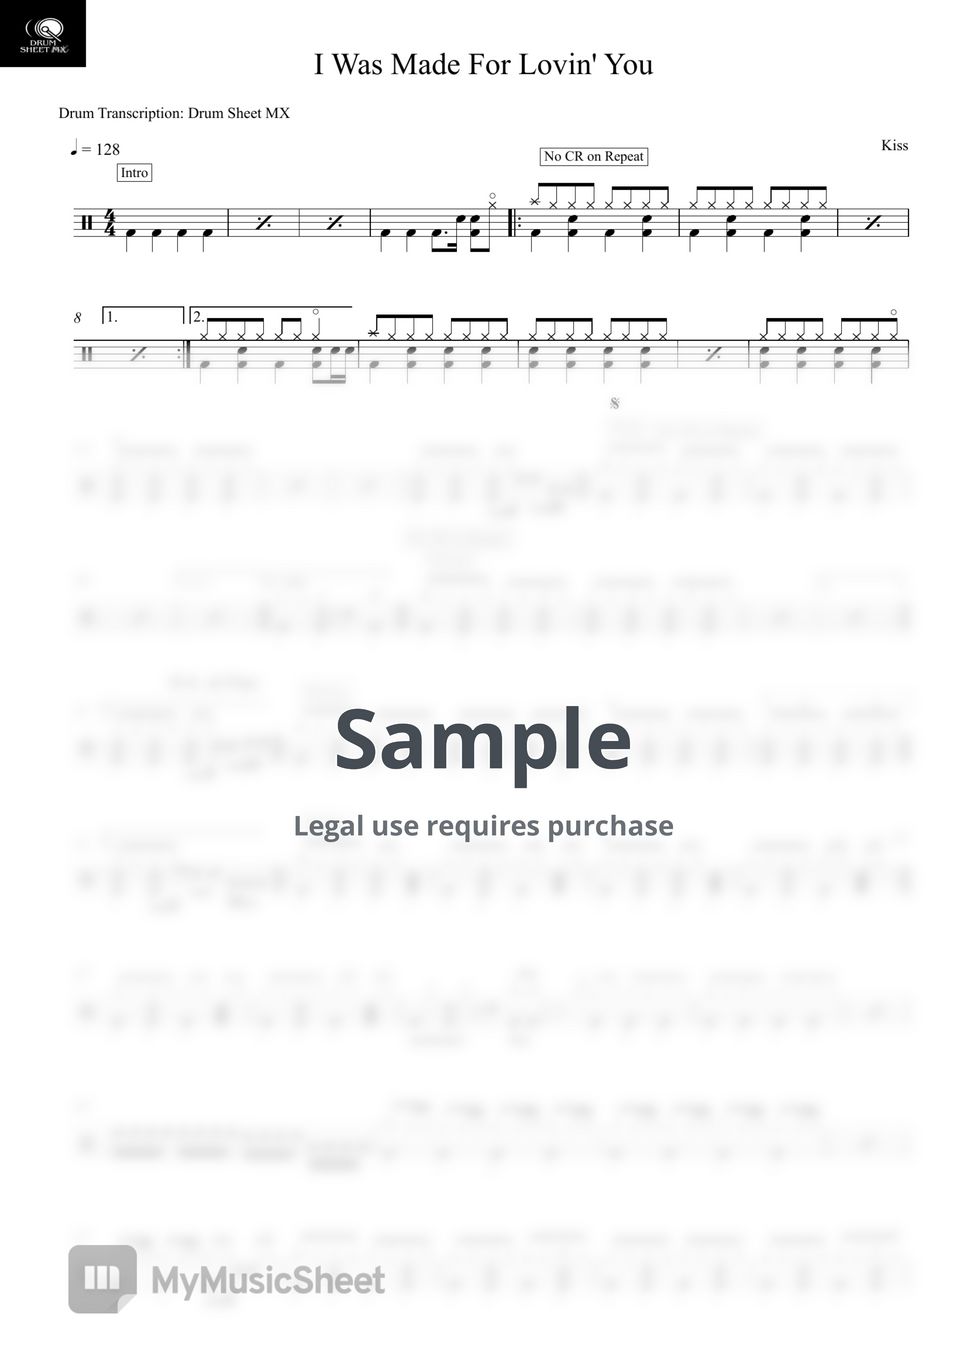 Kiss - I Was Made For Lovin' You by Drum Transcription: Drum Sheet MX